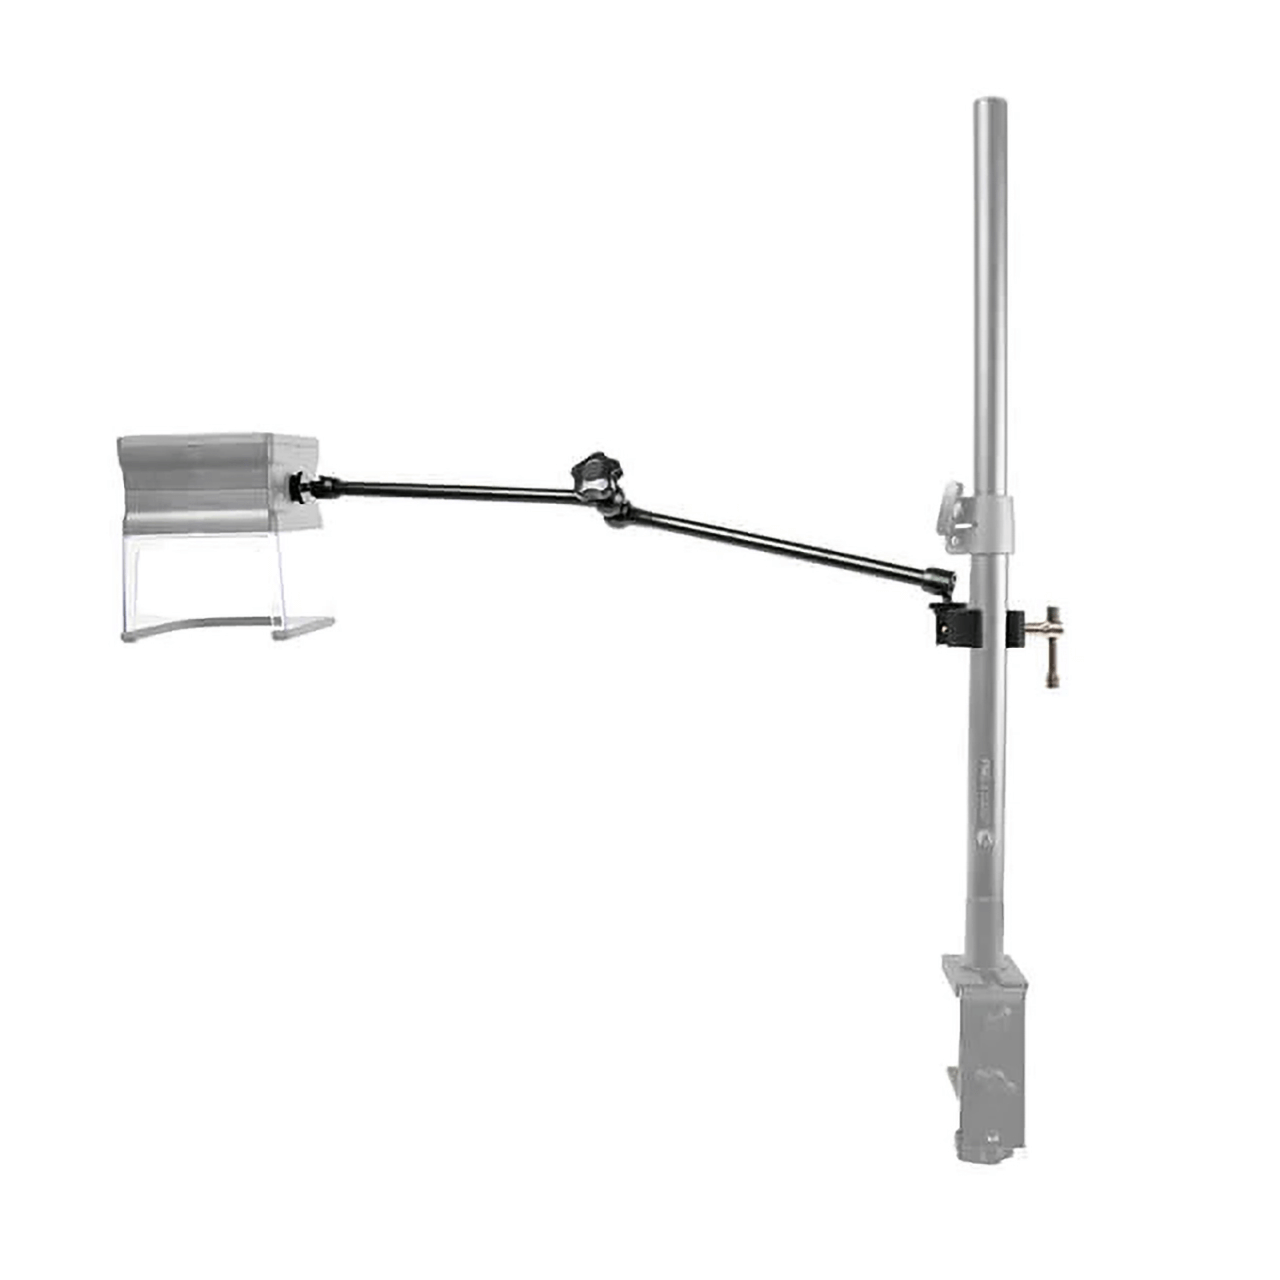 Razertip 20" Flex Arm With Tower Mount For Smoke Extractor (FLX-2)